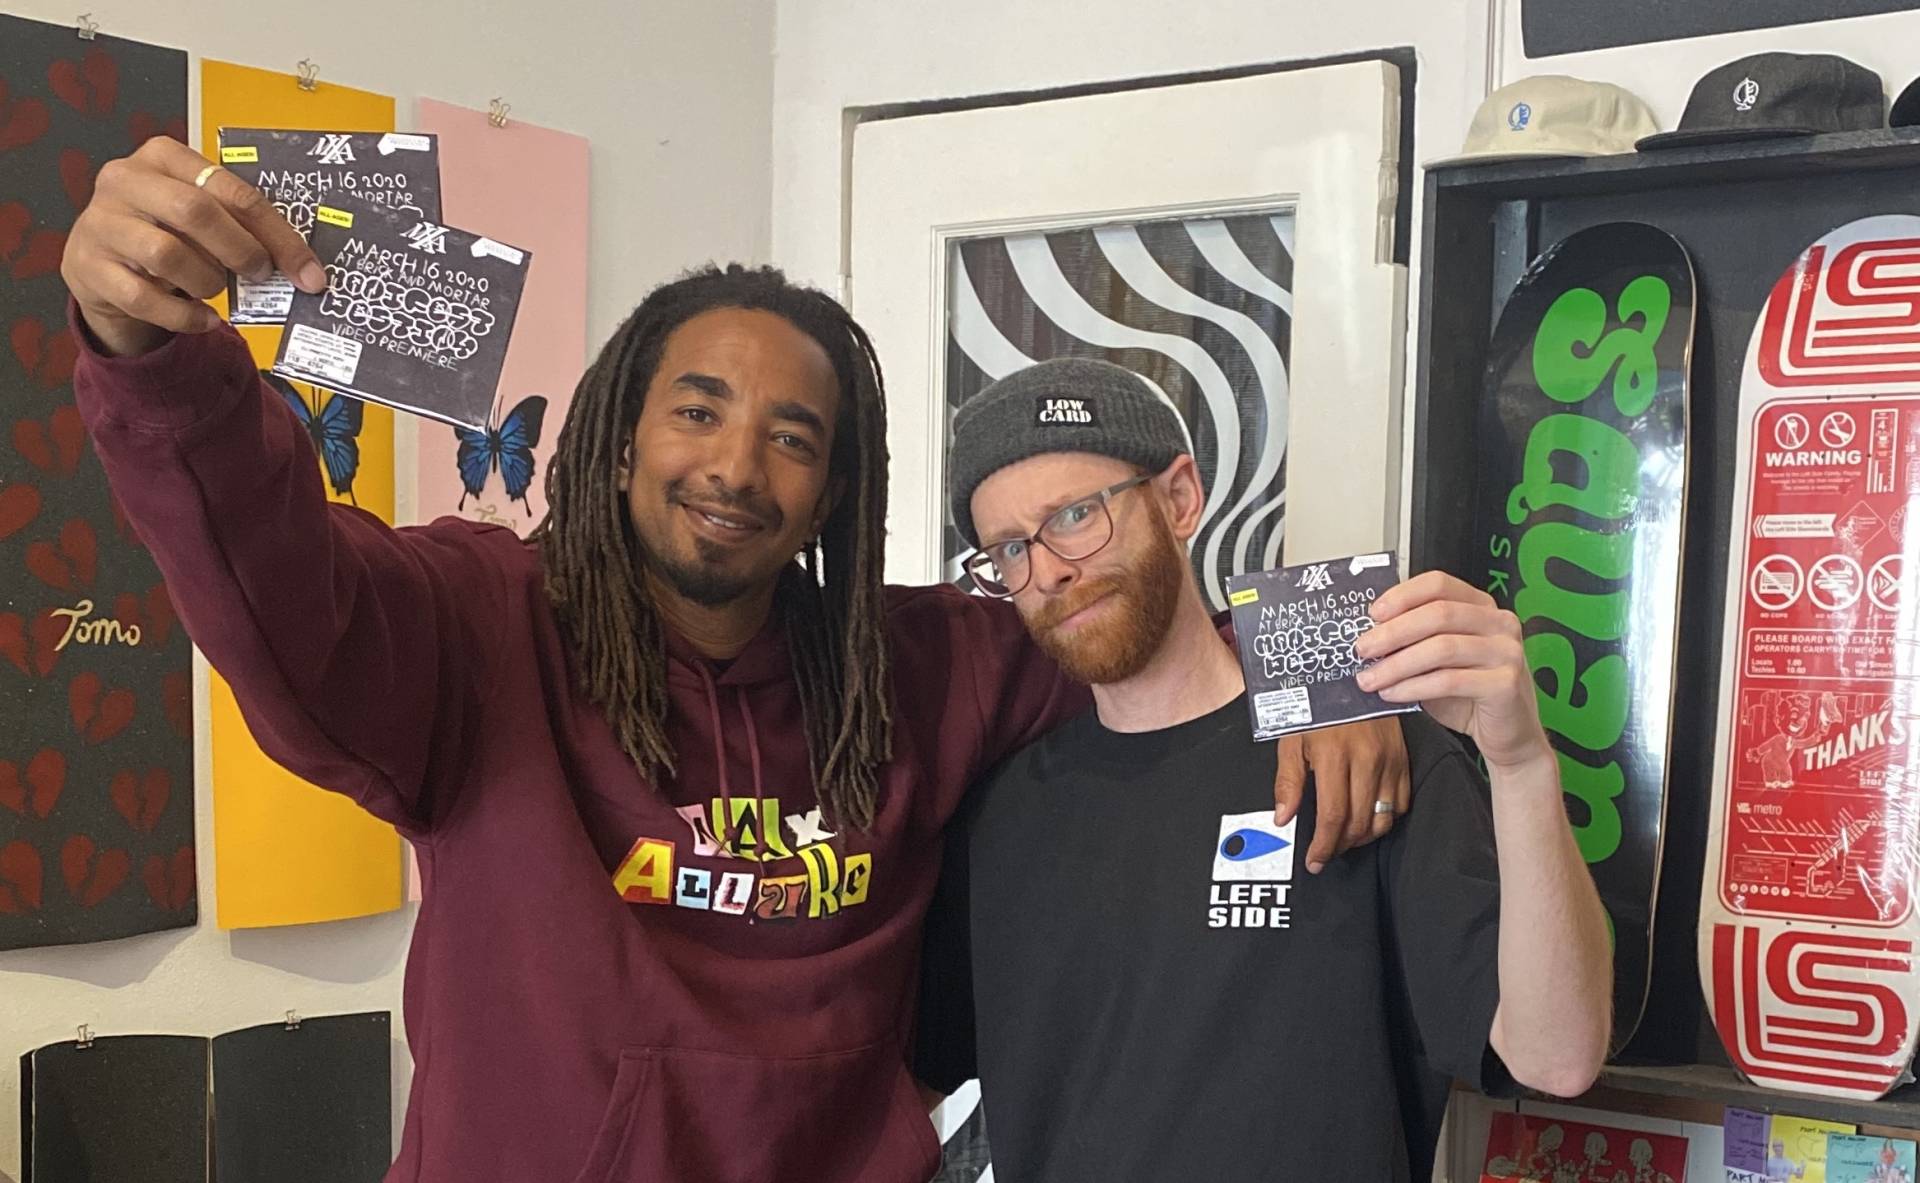 A Black man with long locs stands with his arm around a white man with beard and glasses inside a skateboard shop. They are both smiling.